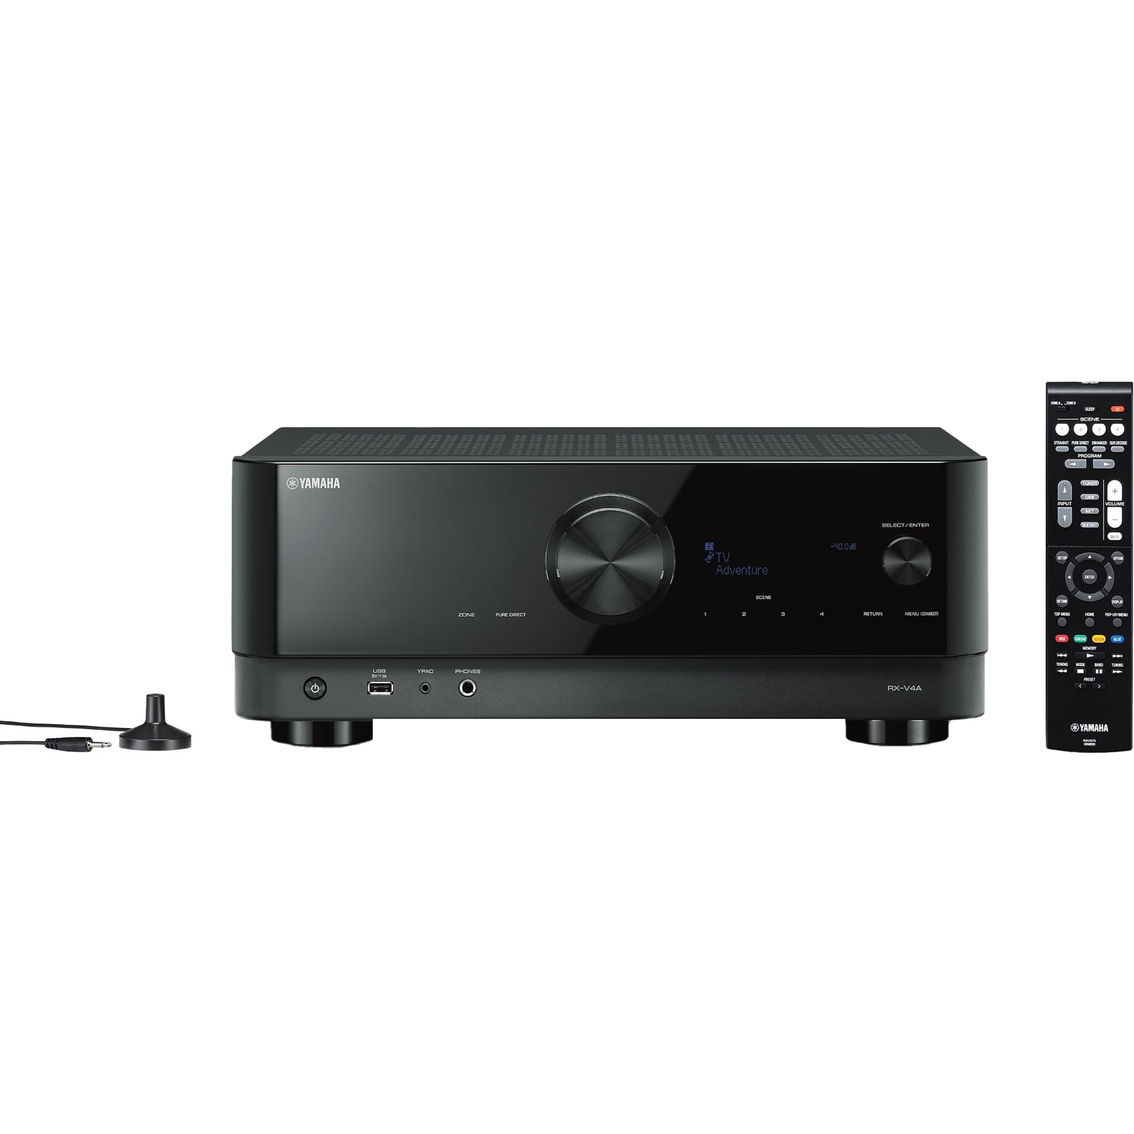 Yamaha Rx-v4a Musiccast Electronics And | Shop With Exchange Hdmi 8k Home | | Av Audio Receiver 5.2-channel The